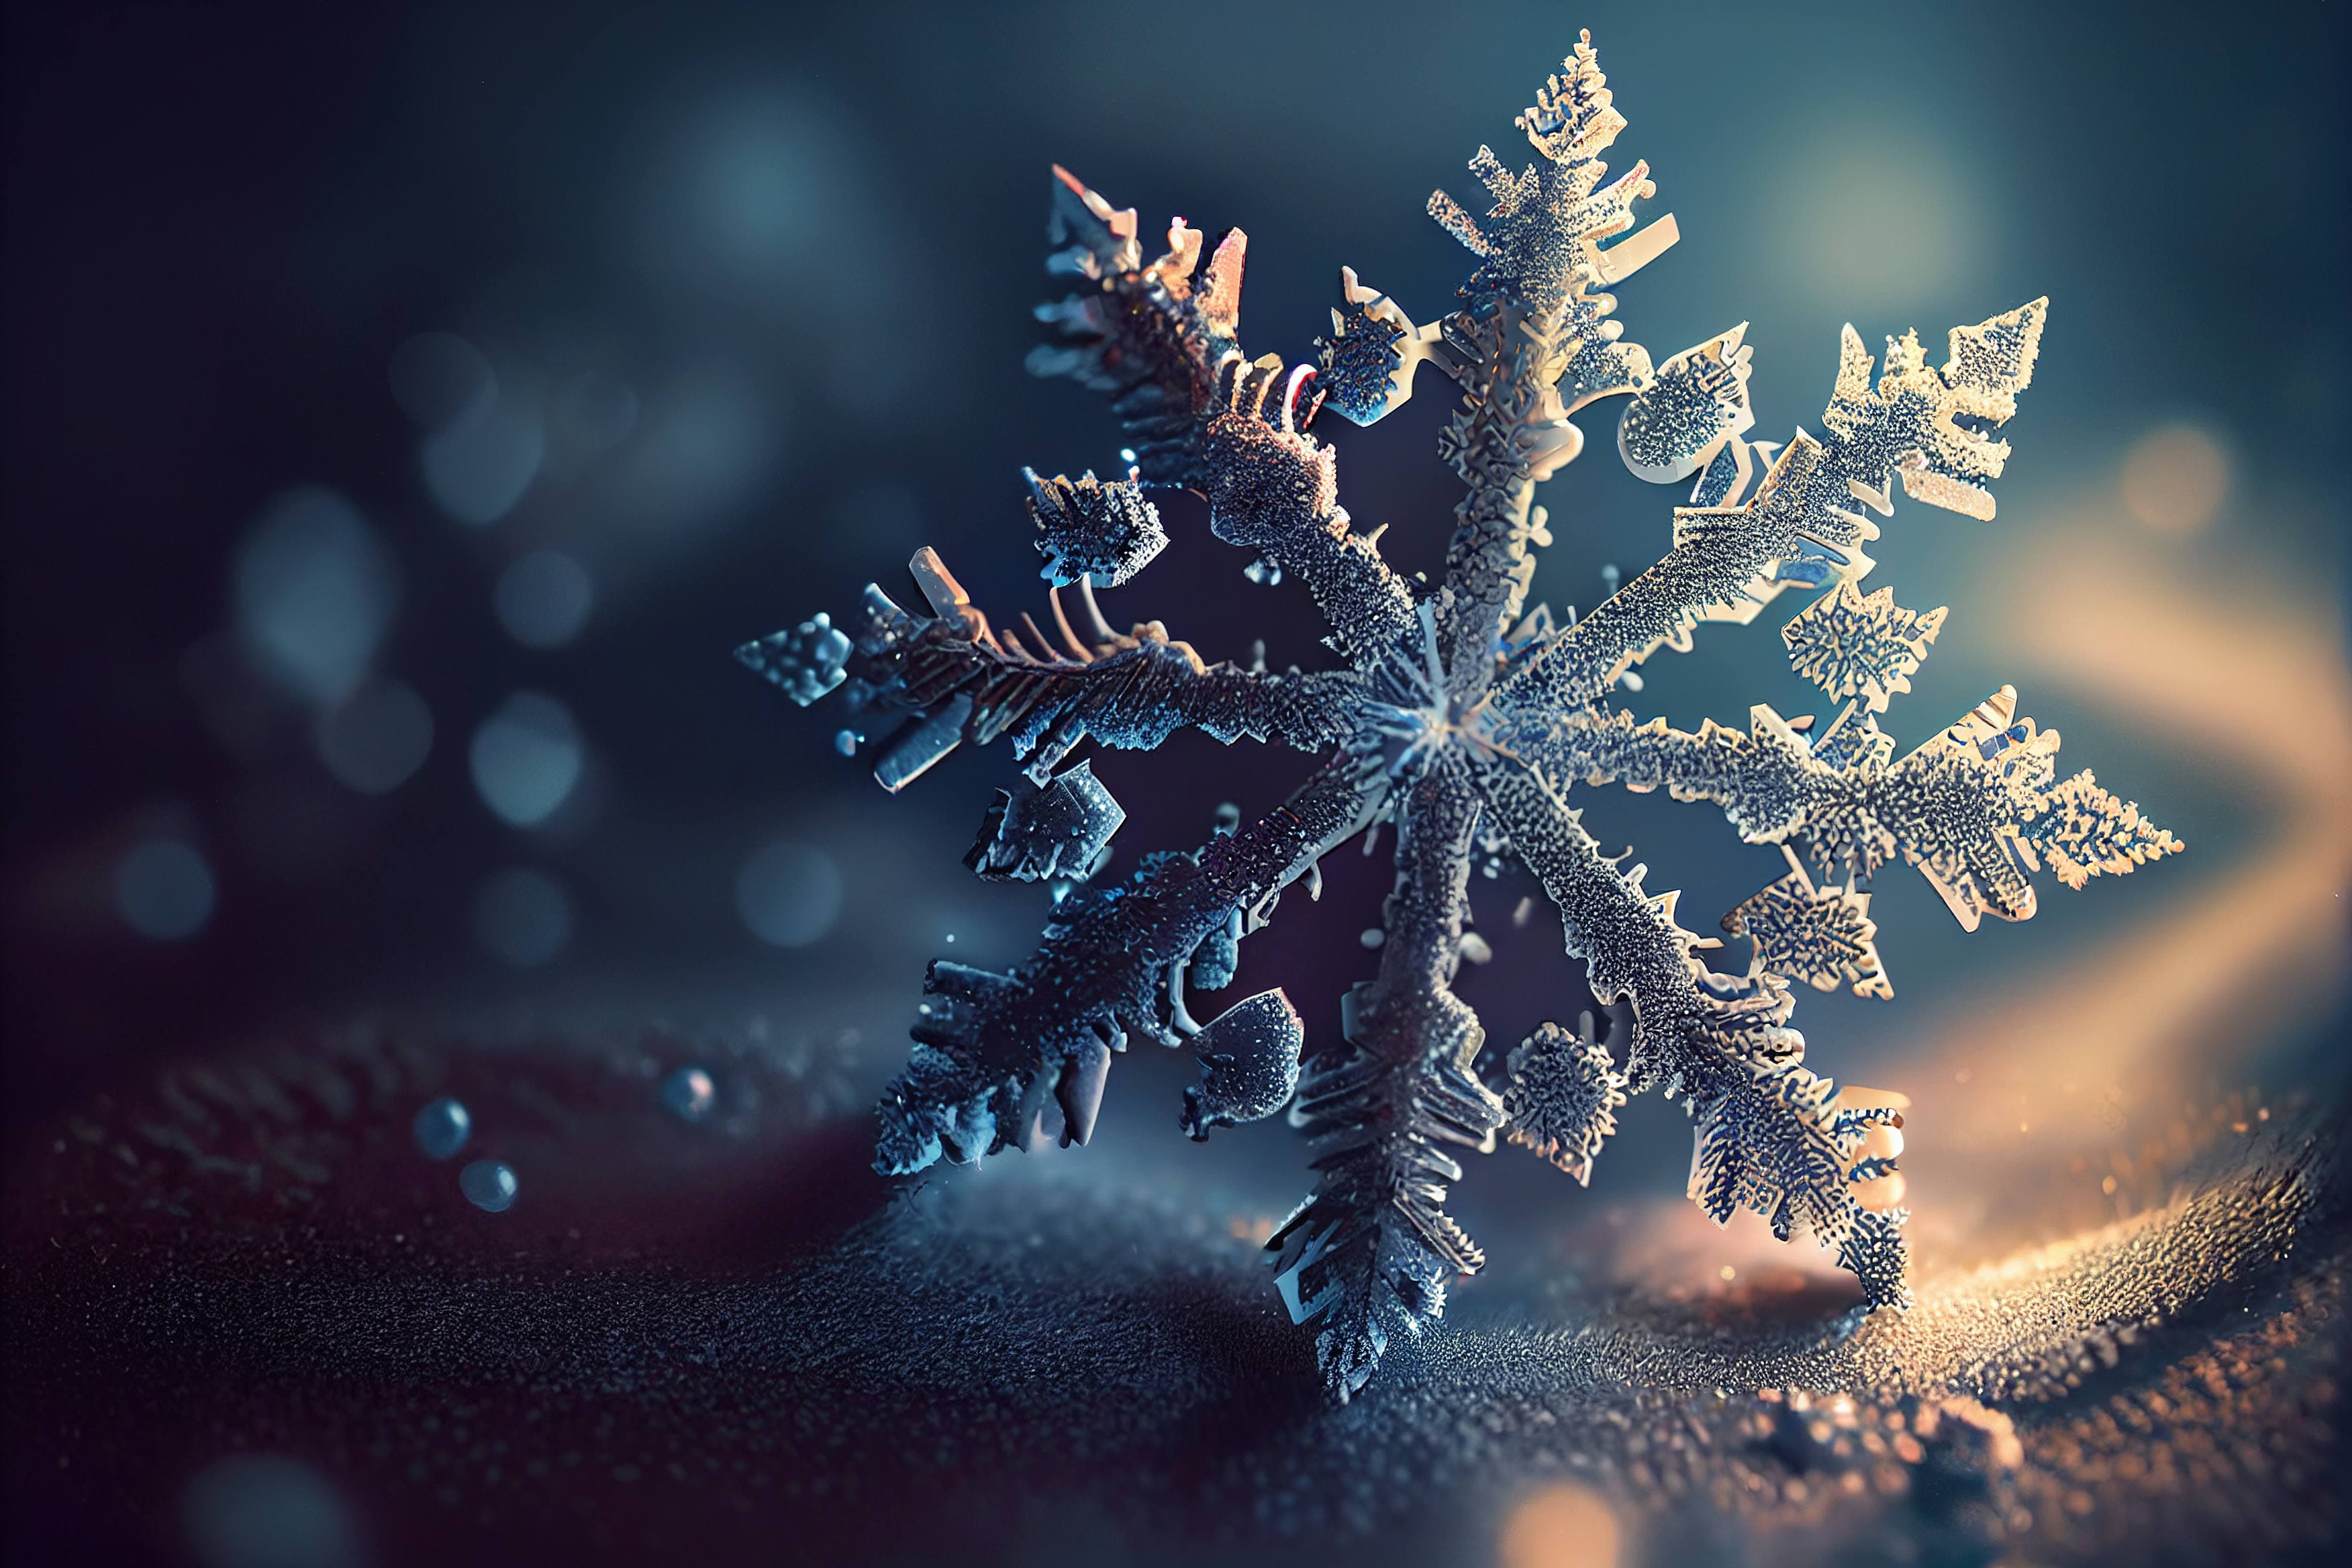 Snowflakes background holidays wallpaper